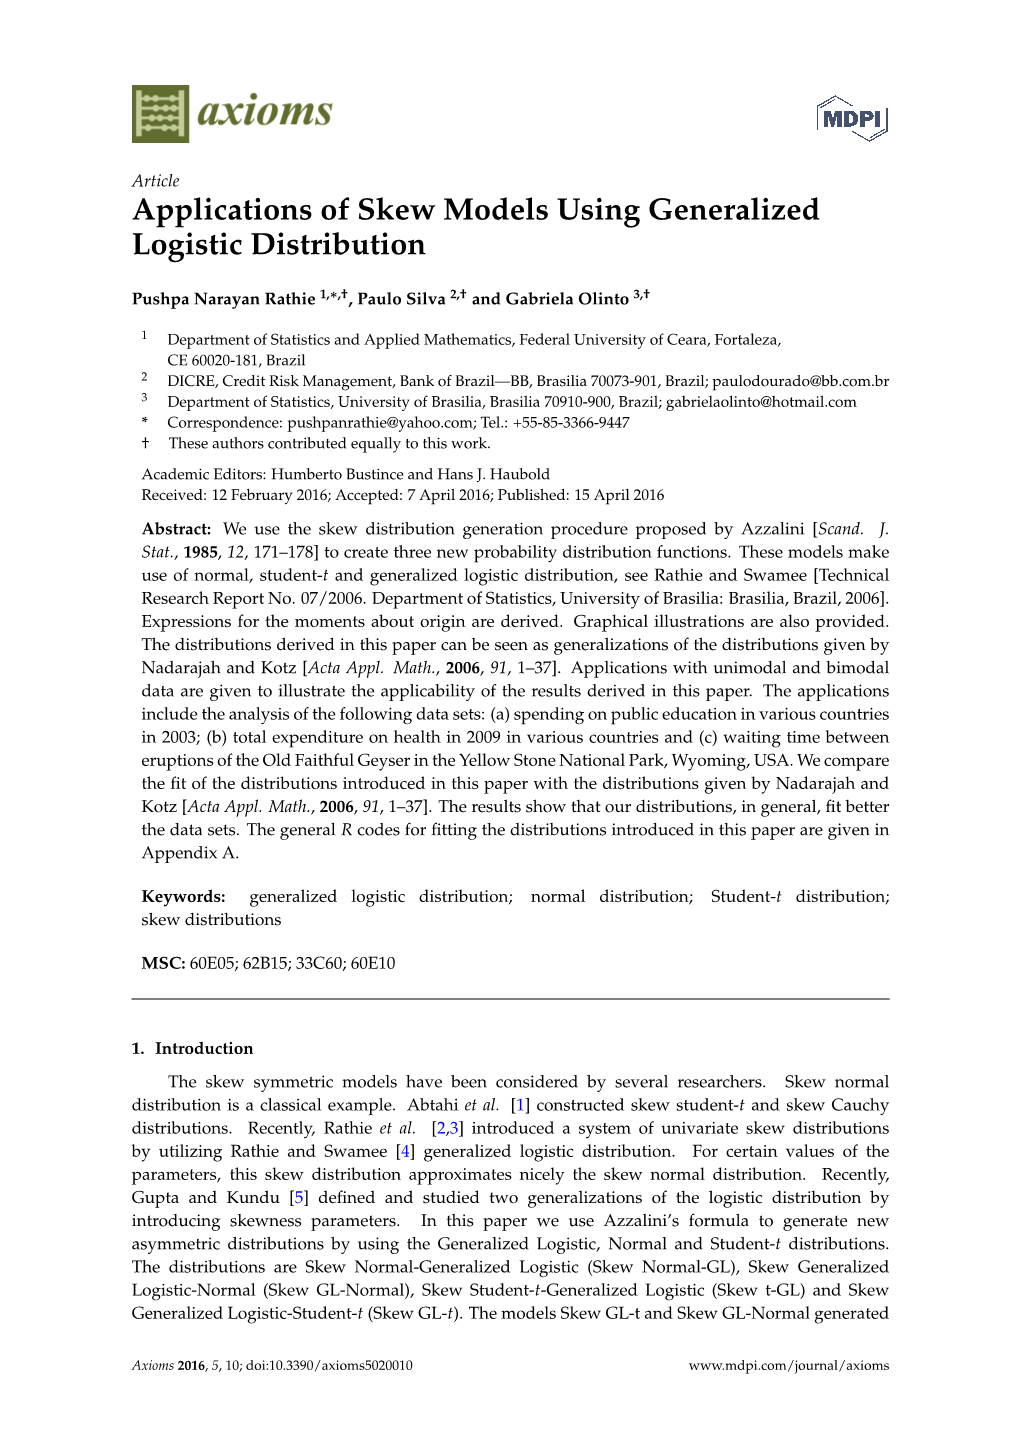 Applications of Skew Models Using Generalized Logistic Distribution